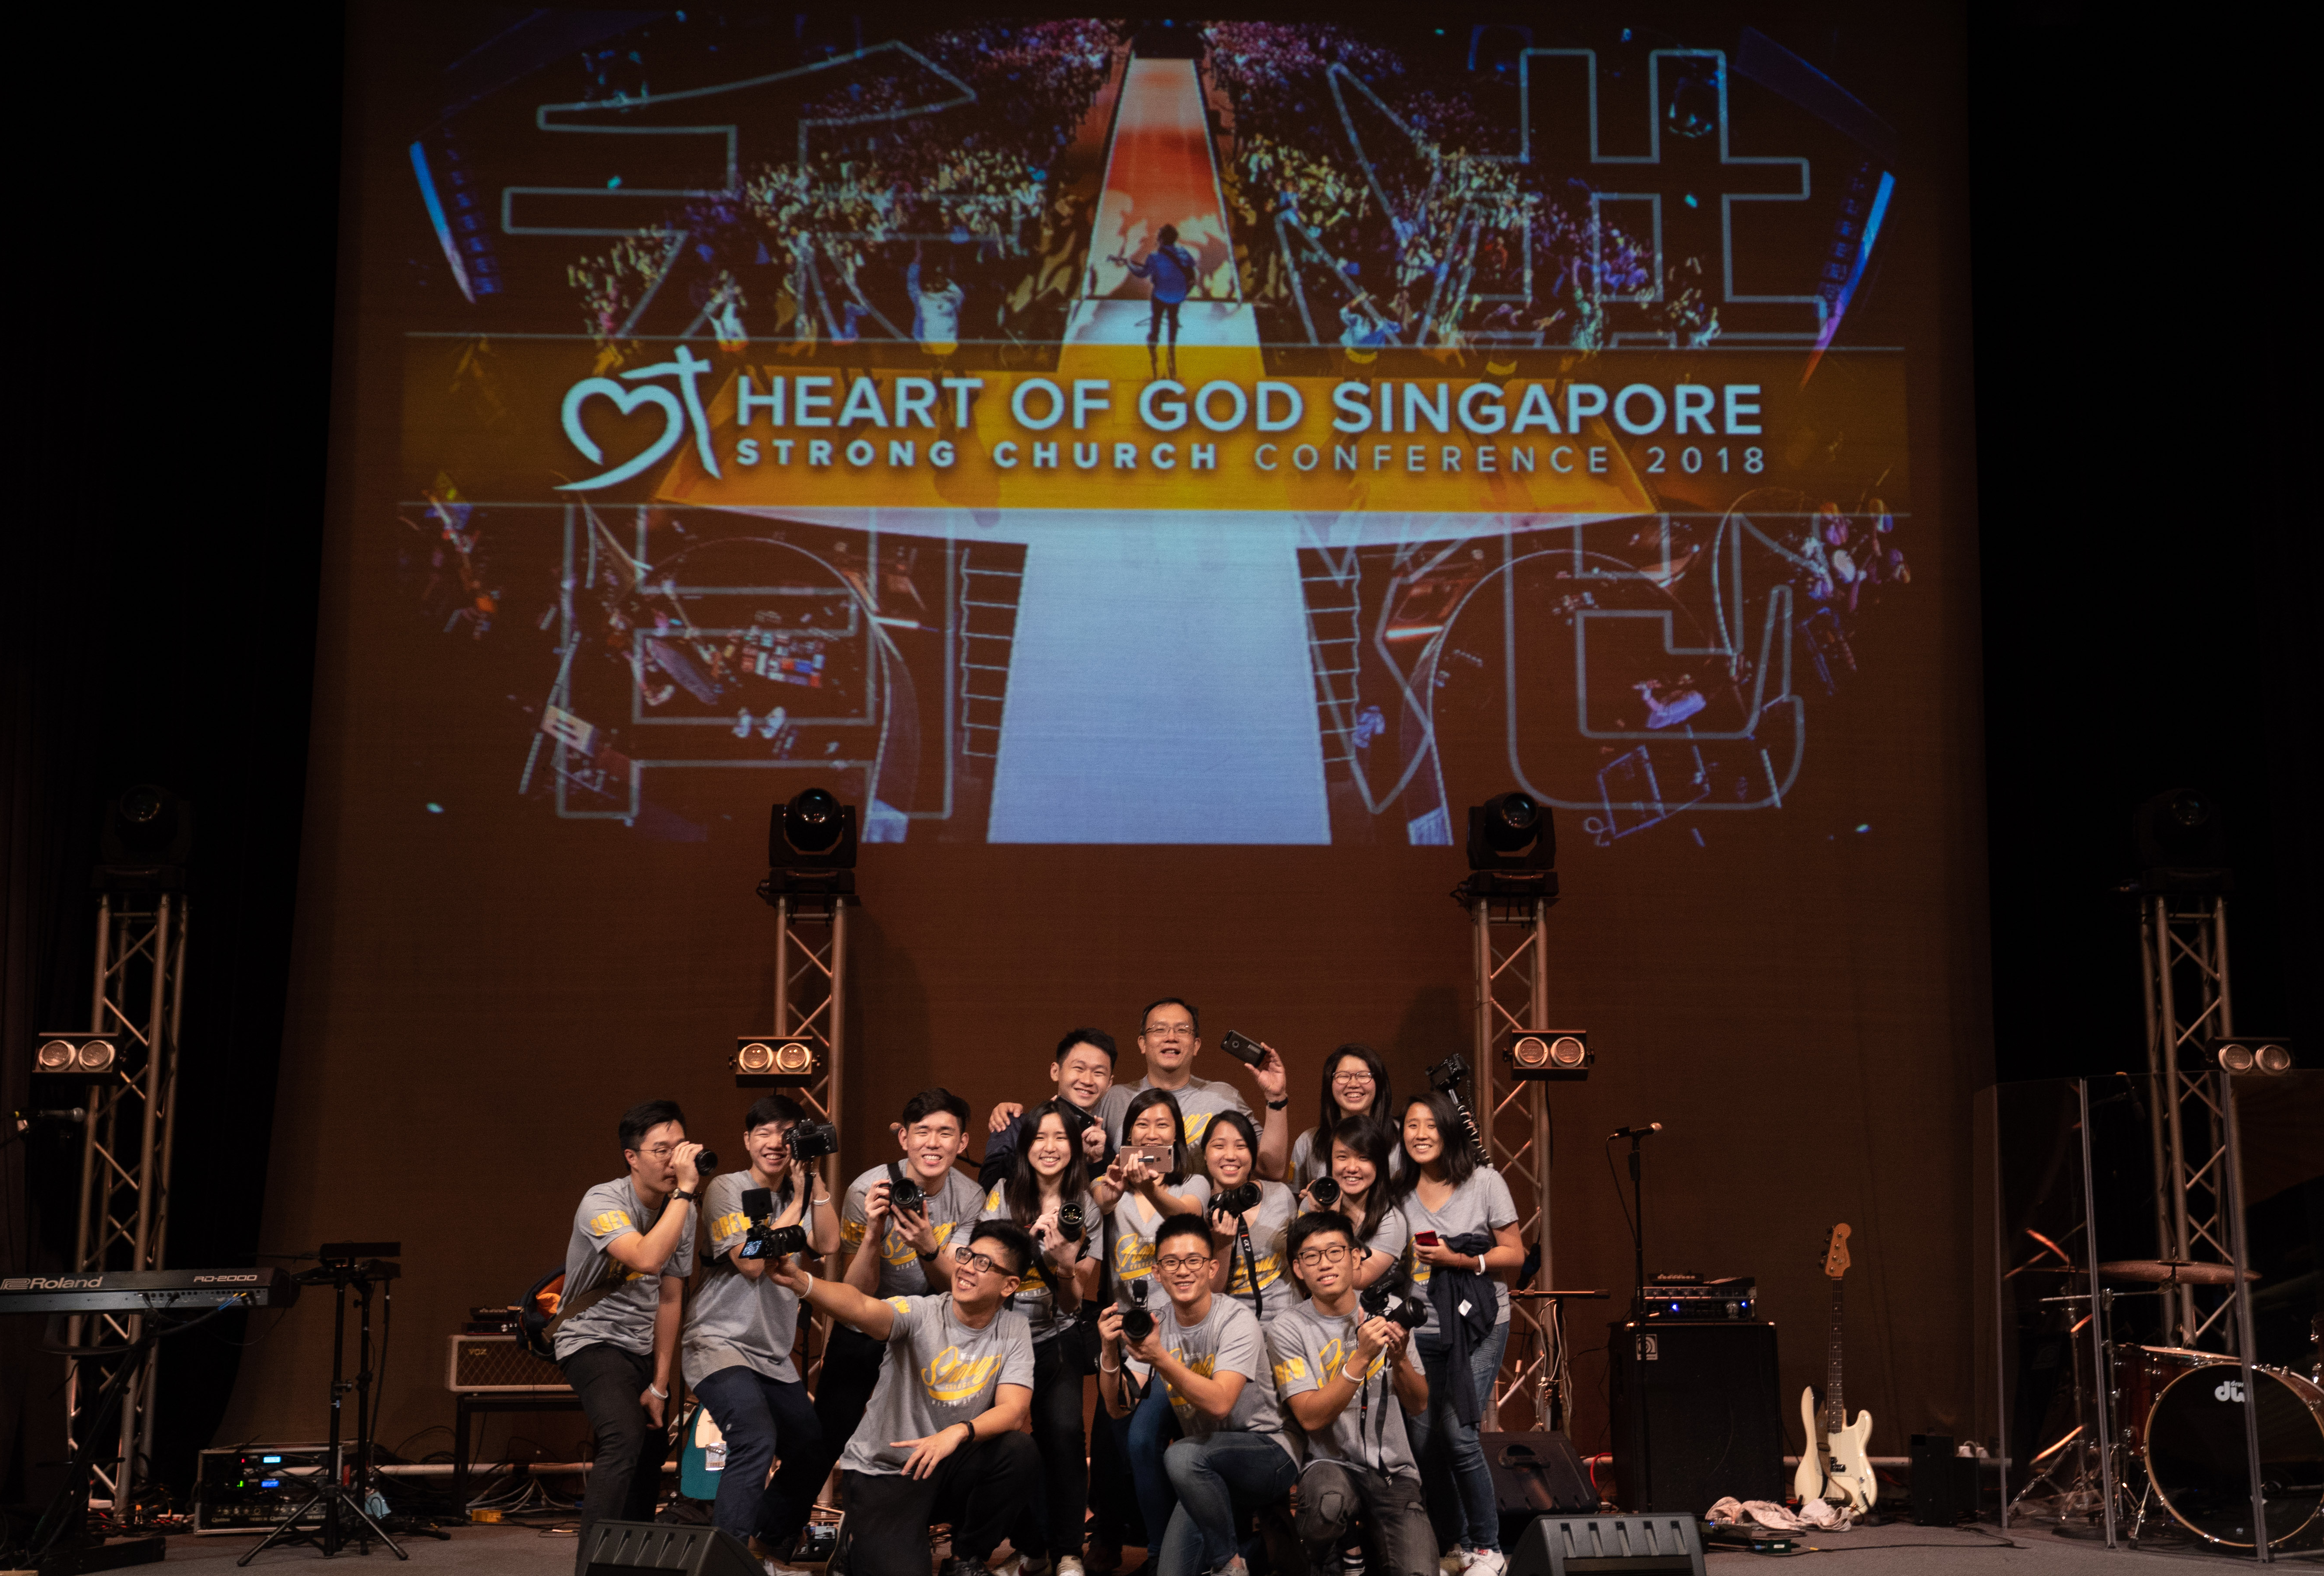 Instead of going to the 2018 World Cup Final, Alton was found in HOGC’s Strong Church Hong Kong. There, he produced video coverage for the event and shared his life story on stage.